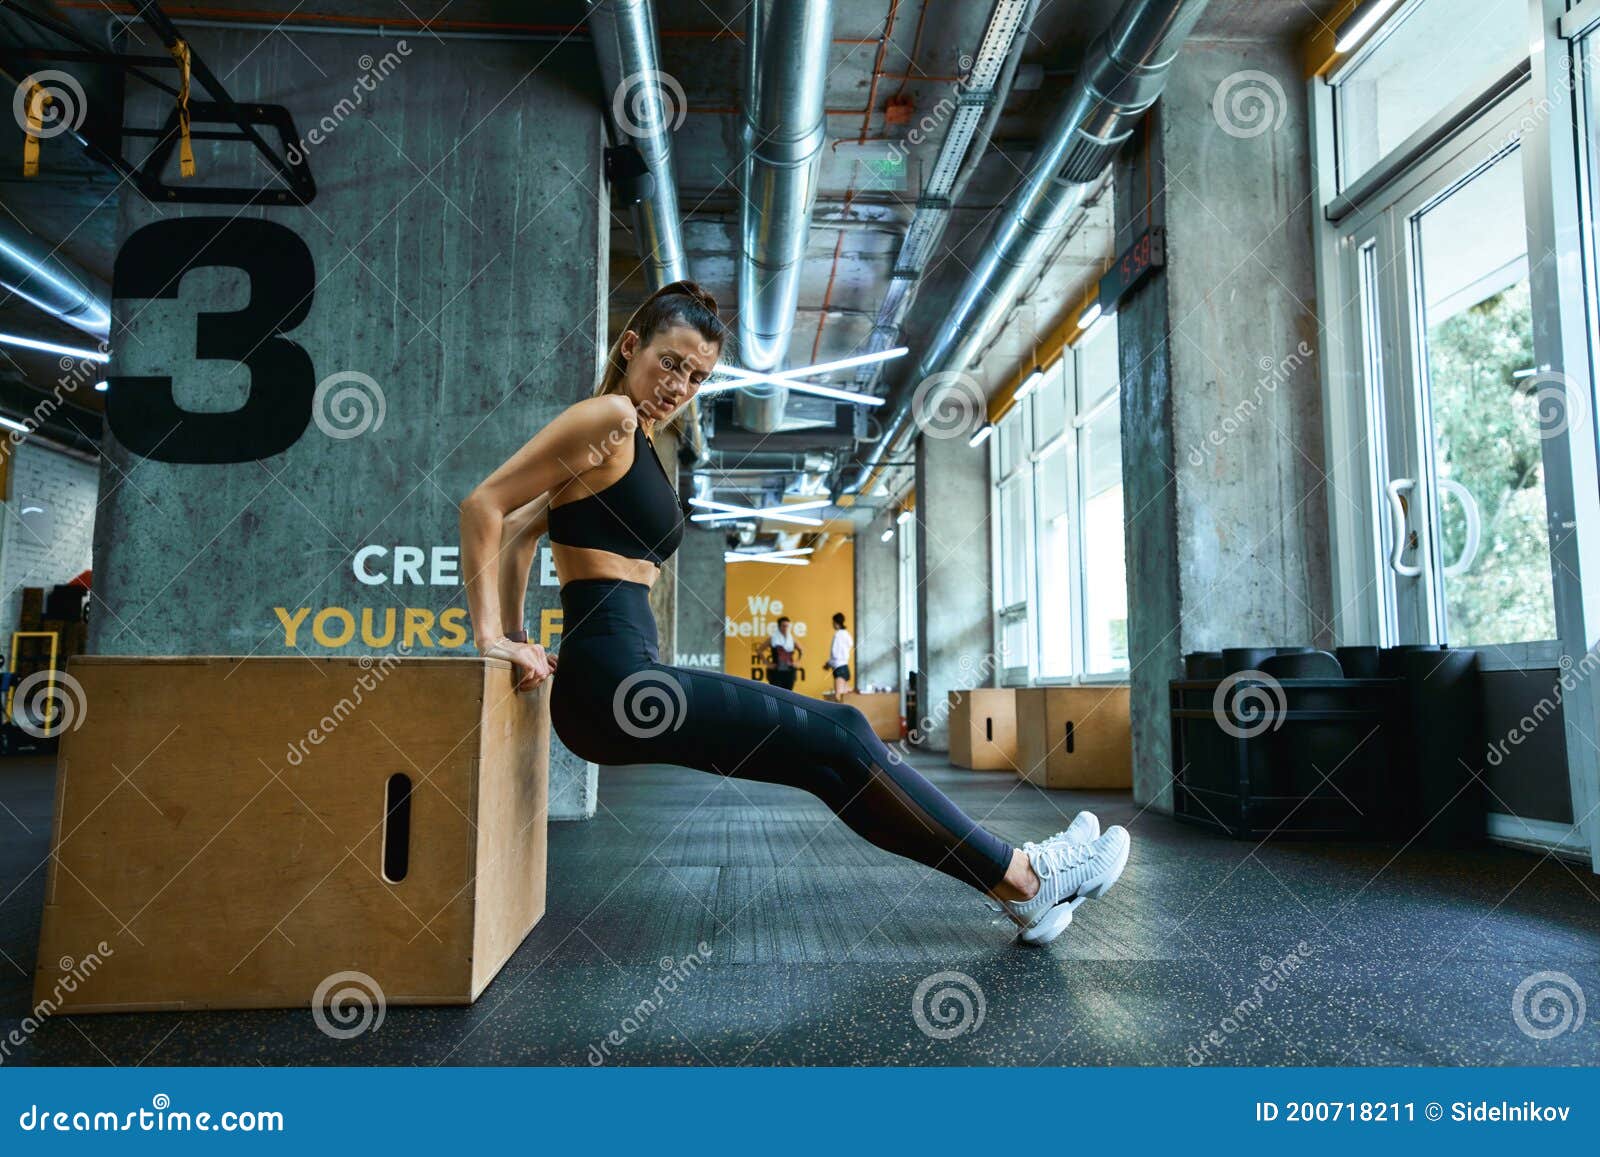 https://thumbs.dreamstime.com/z/fitness-workout-full-length-young-athletic-woman-sportswear-doing-triceps-exercises-wooden-crossfit-jump-box-fitness-200718211.jpg